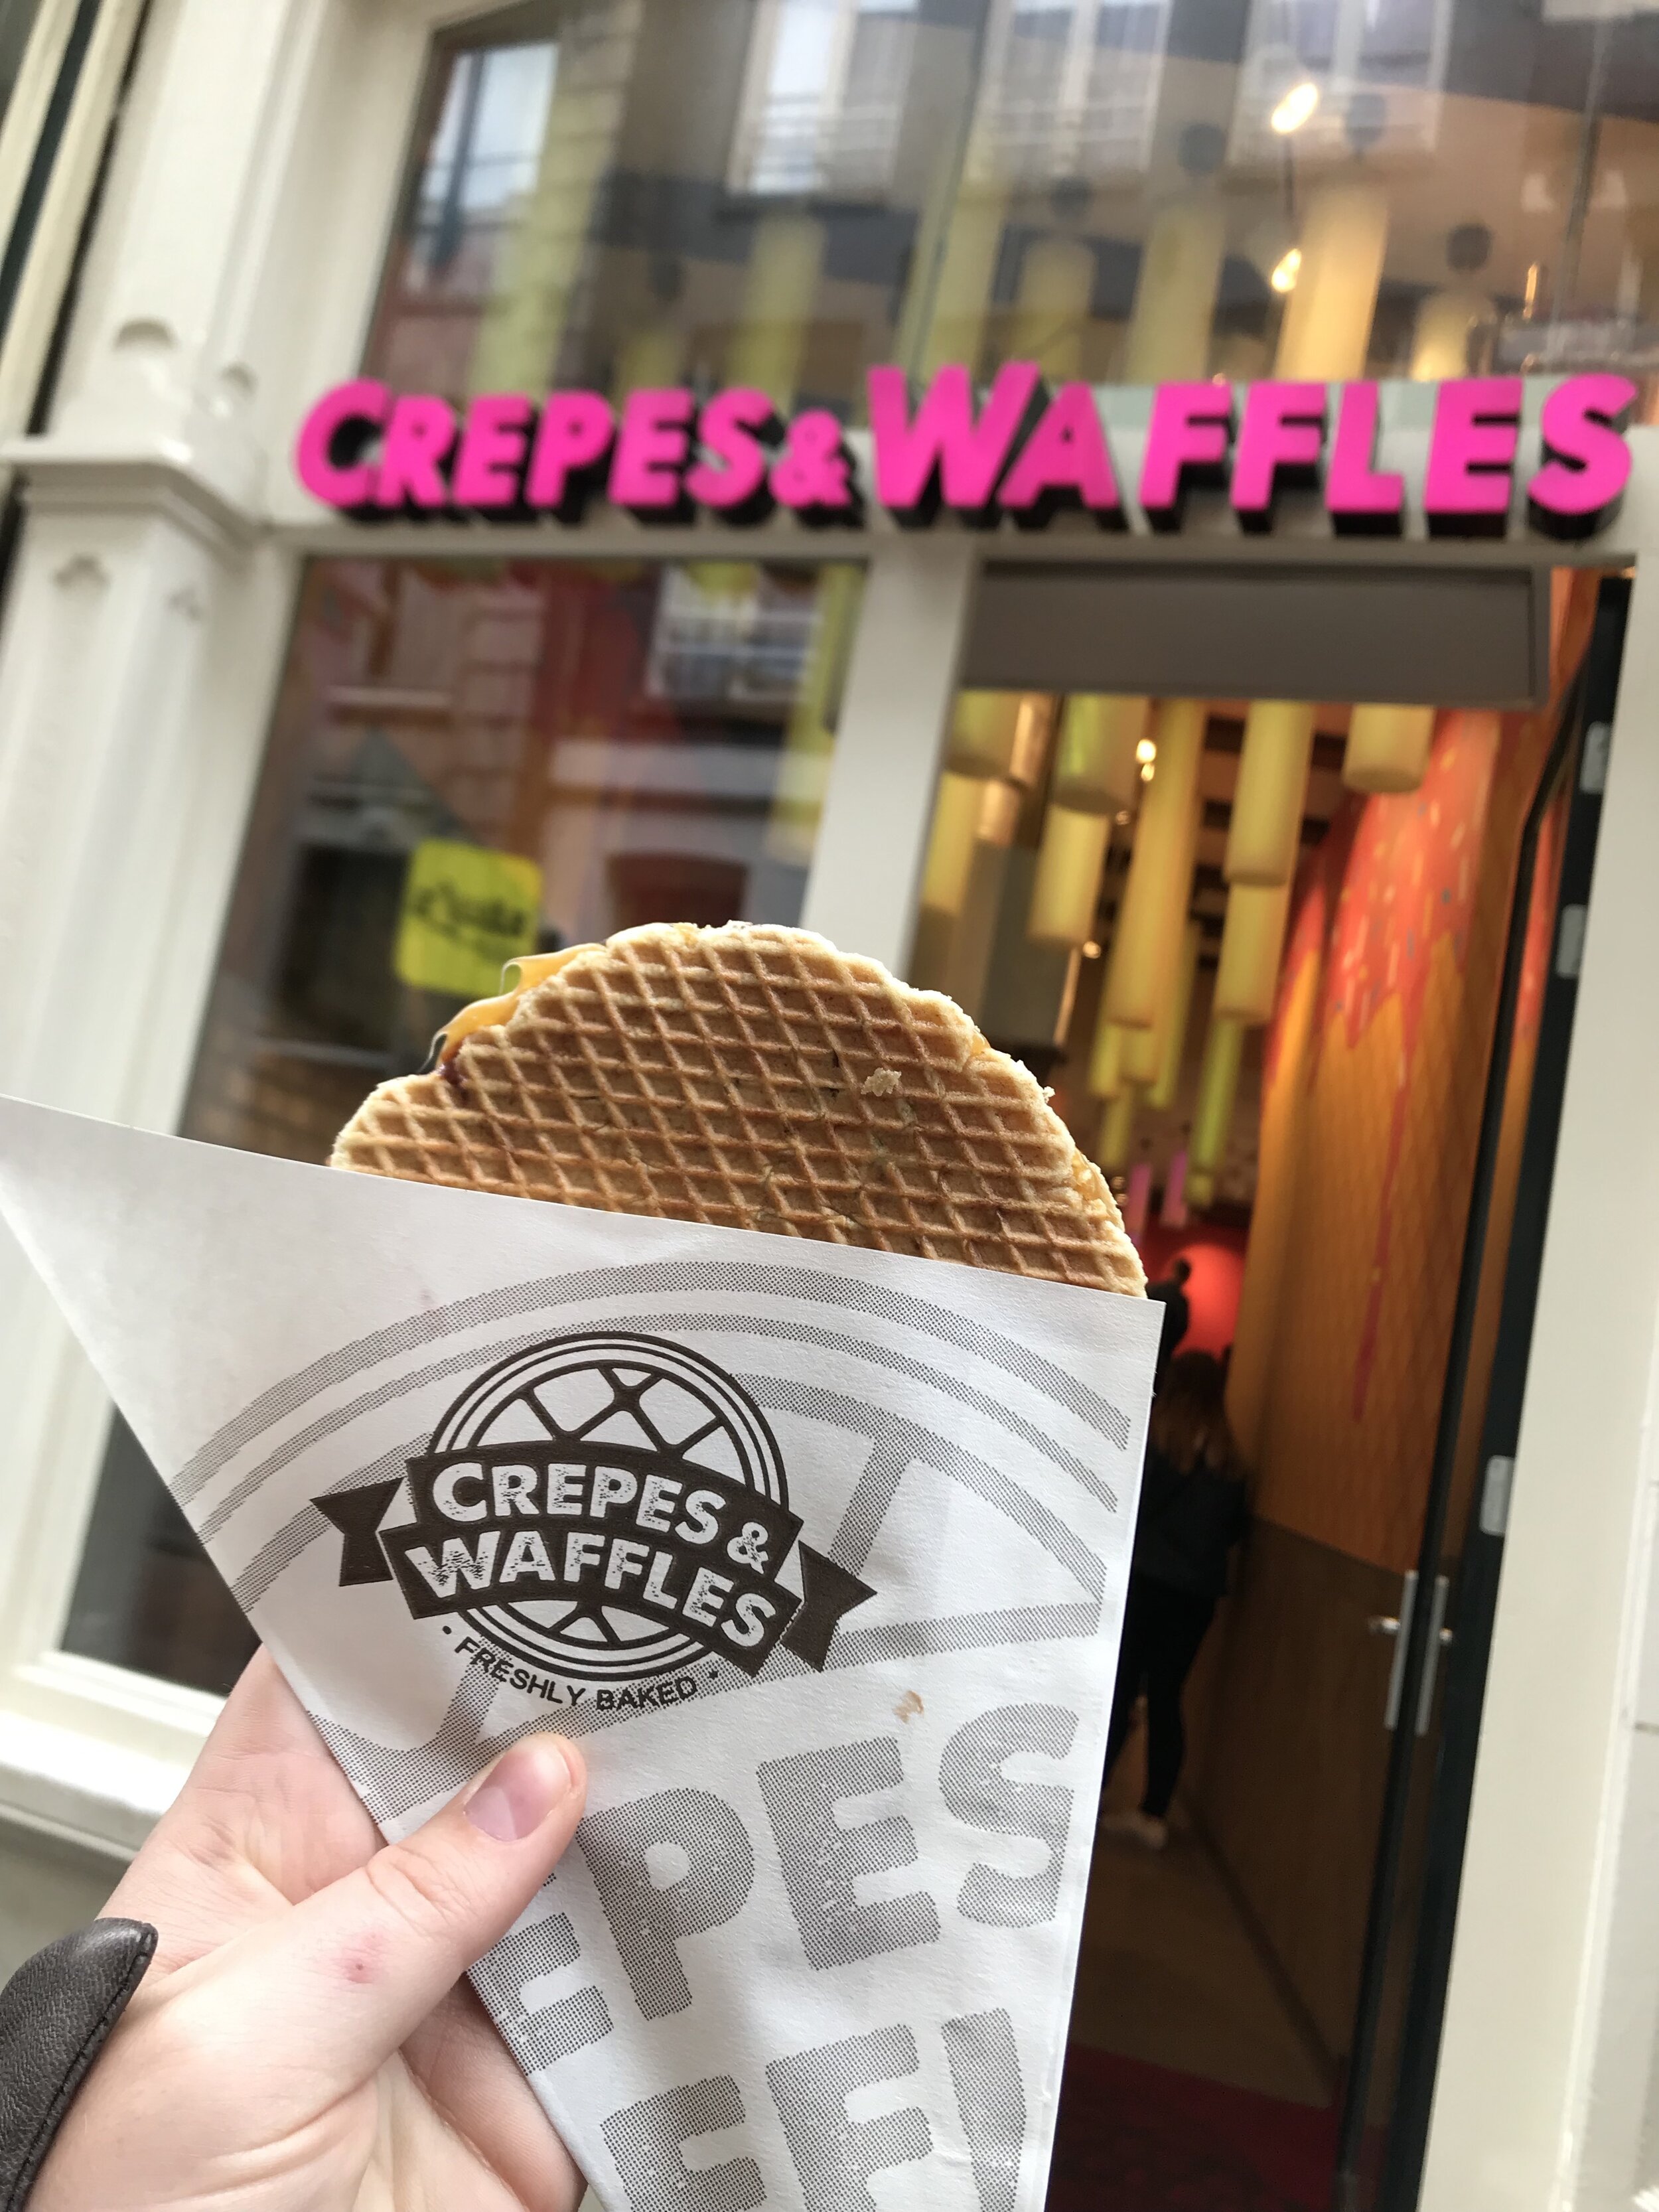 Stroopwaffles are so warm and gooey and can be presented in many different ways. All equally as delicious!  